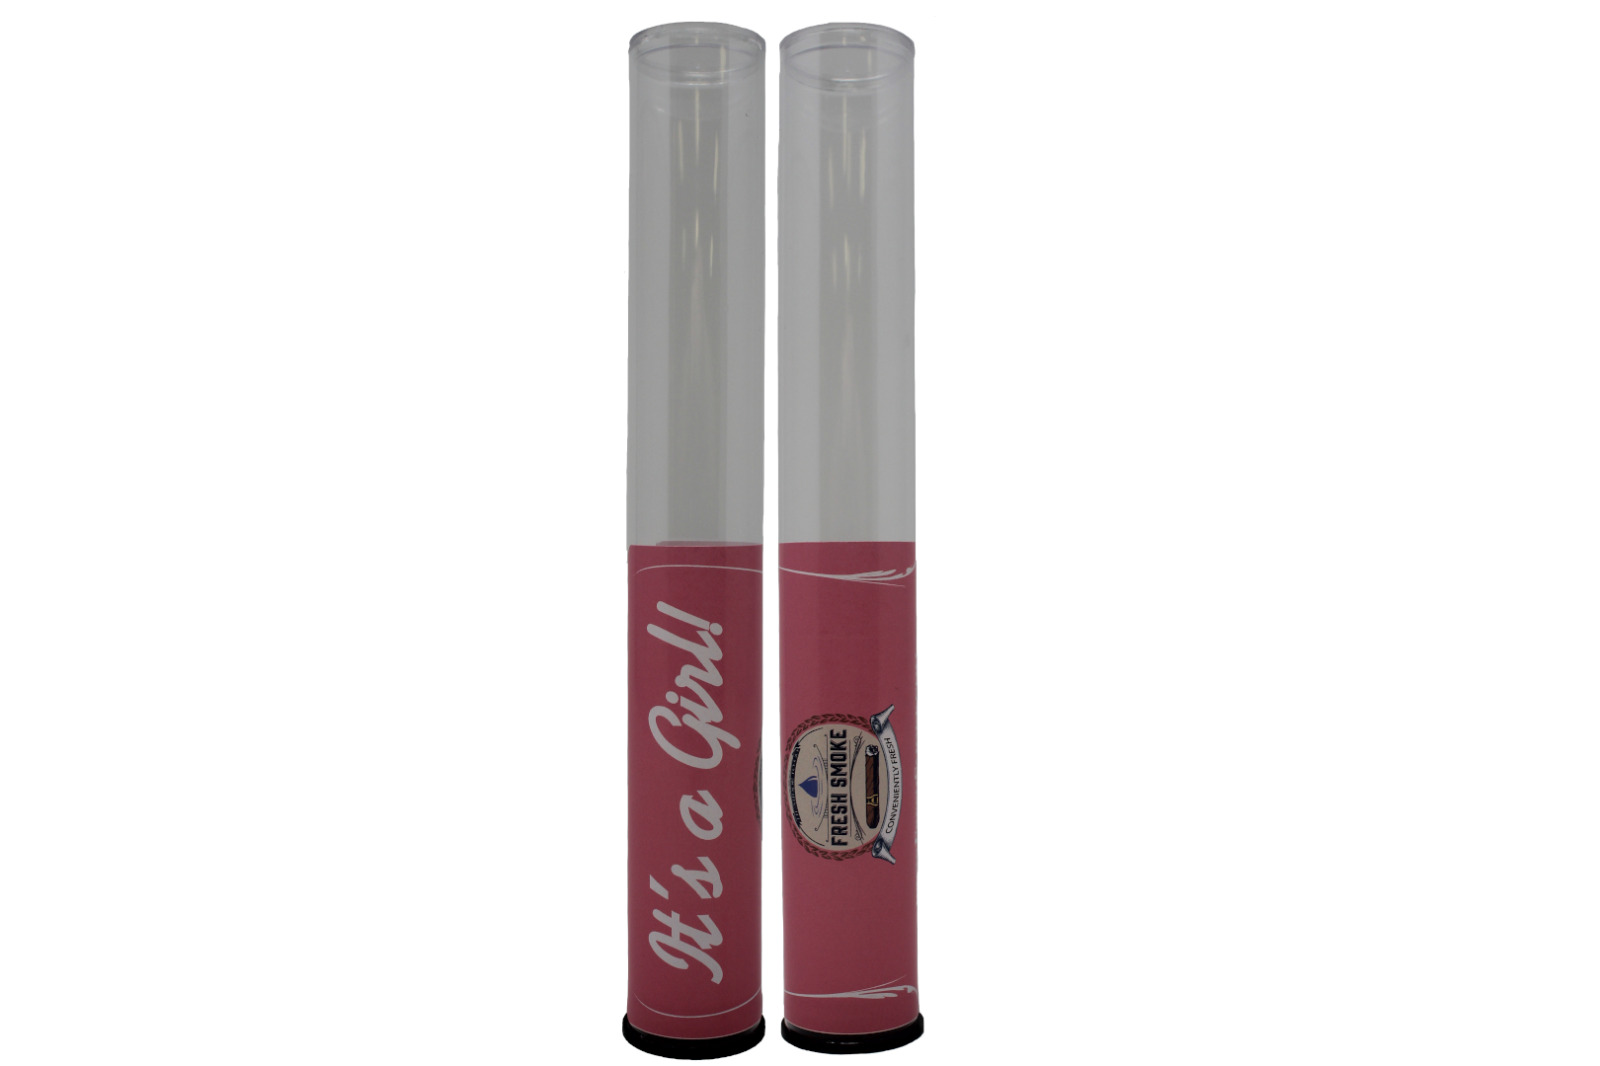 It's A Girl - 6 Pack Cigar Tubes with 4 gram HUMI-SMART 2-Way Humidity Control